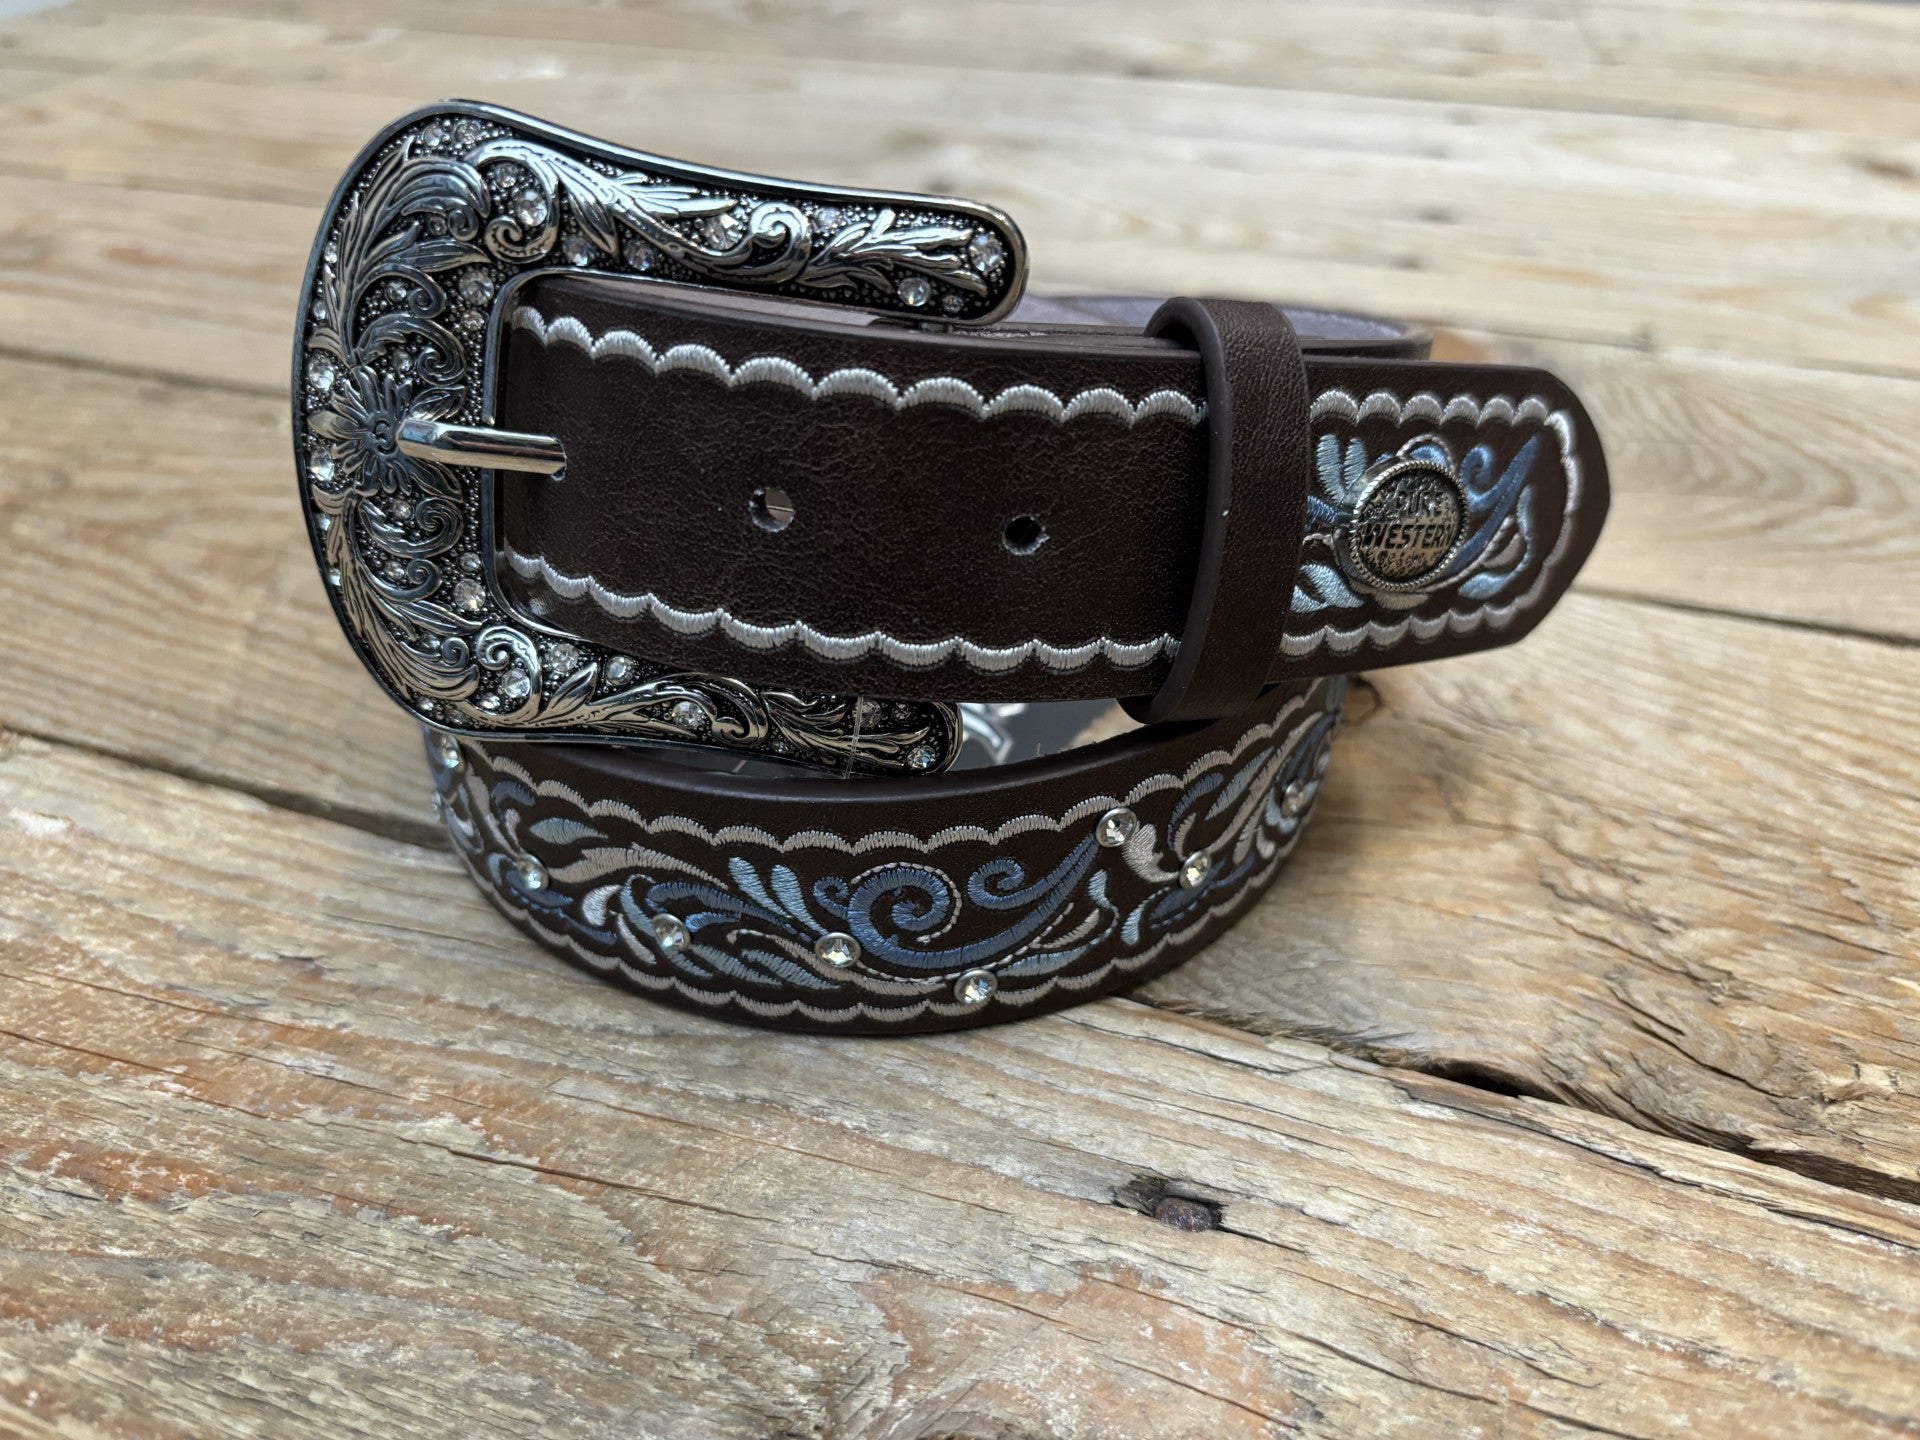 Womens Pure Western Carrie Belt - Chocolate (7041897267277)